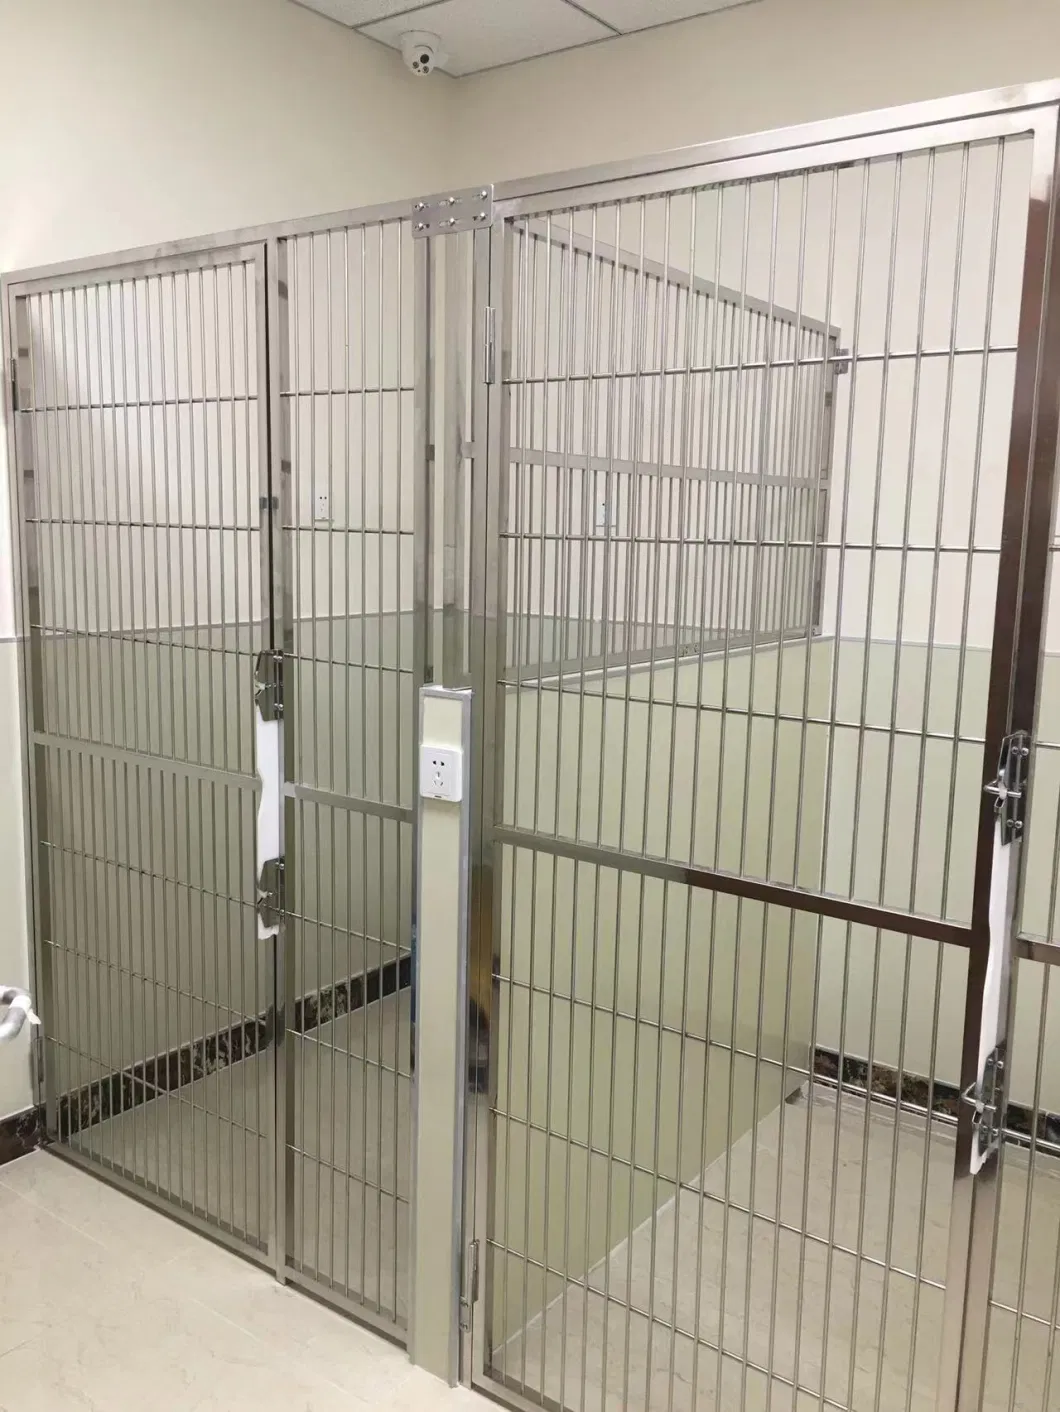 Kennel Stainless Steel Pet Dog Cage Dog Kennel Runs Outdoor Indoor Heated Dog Kennel